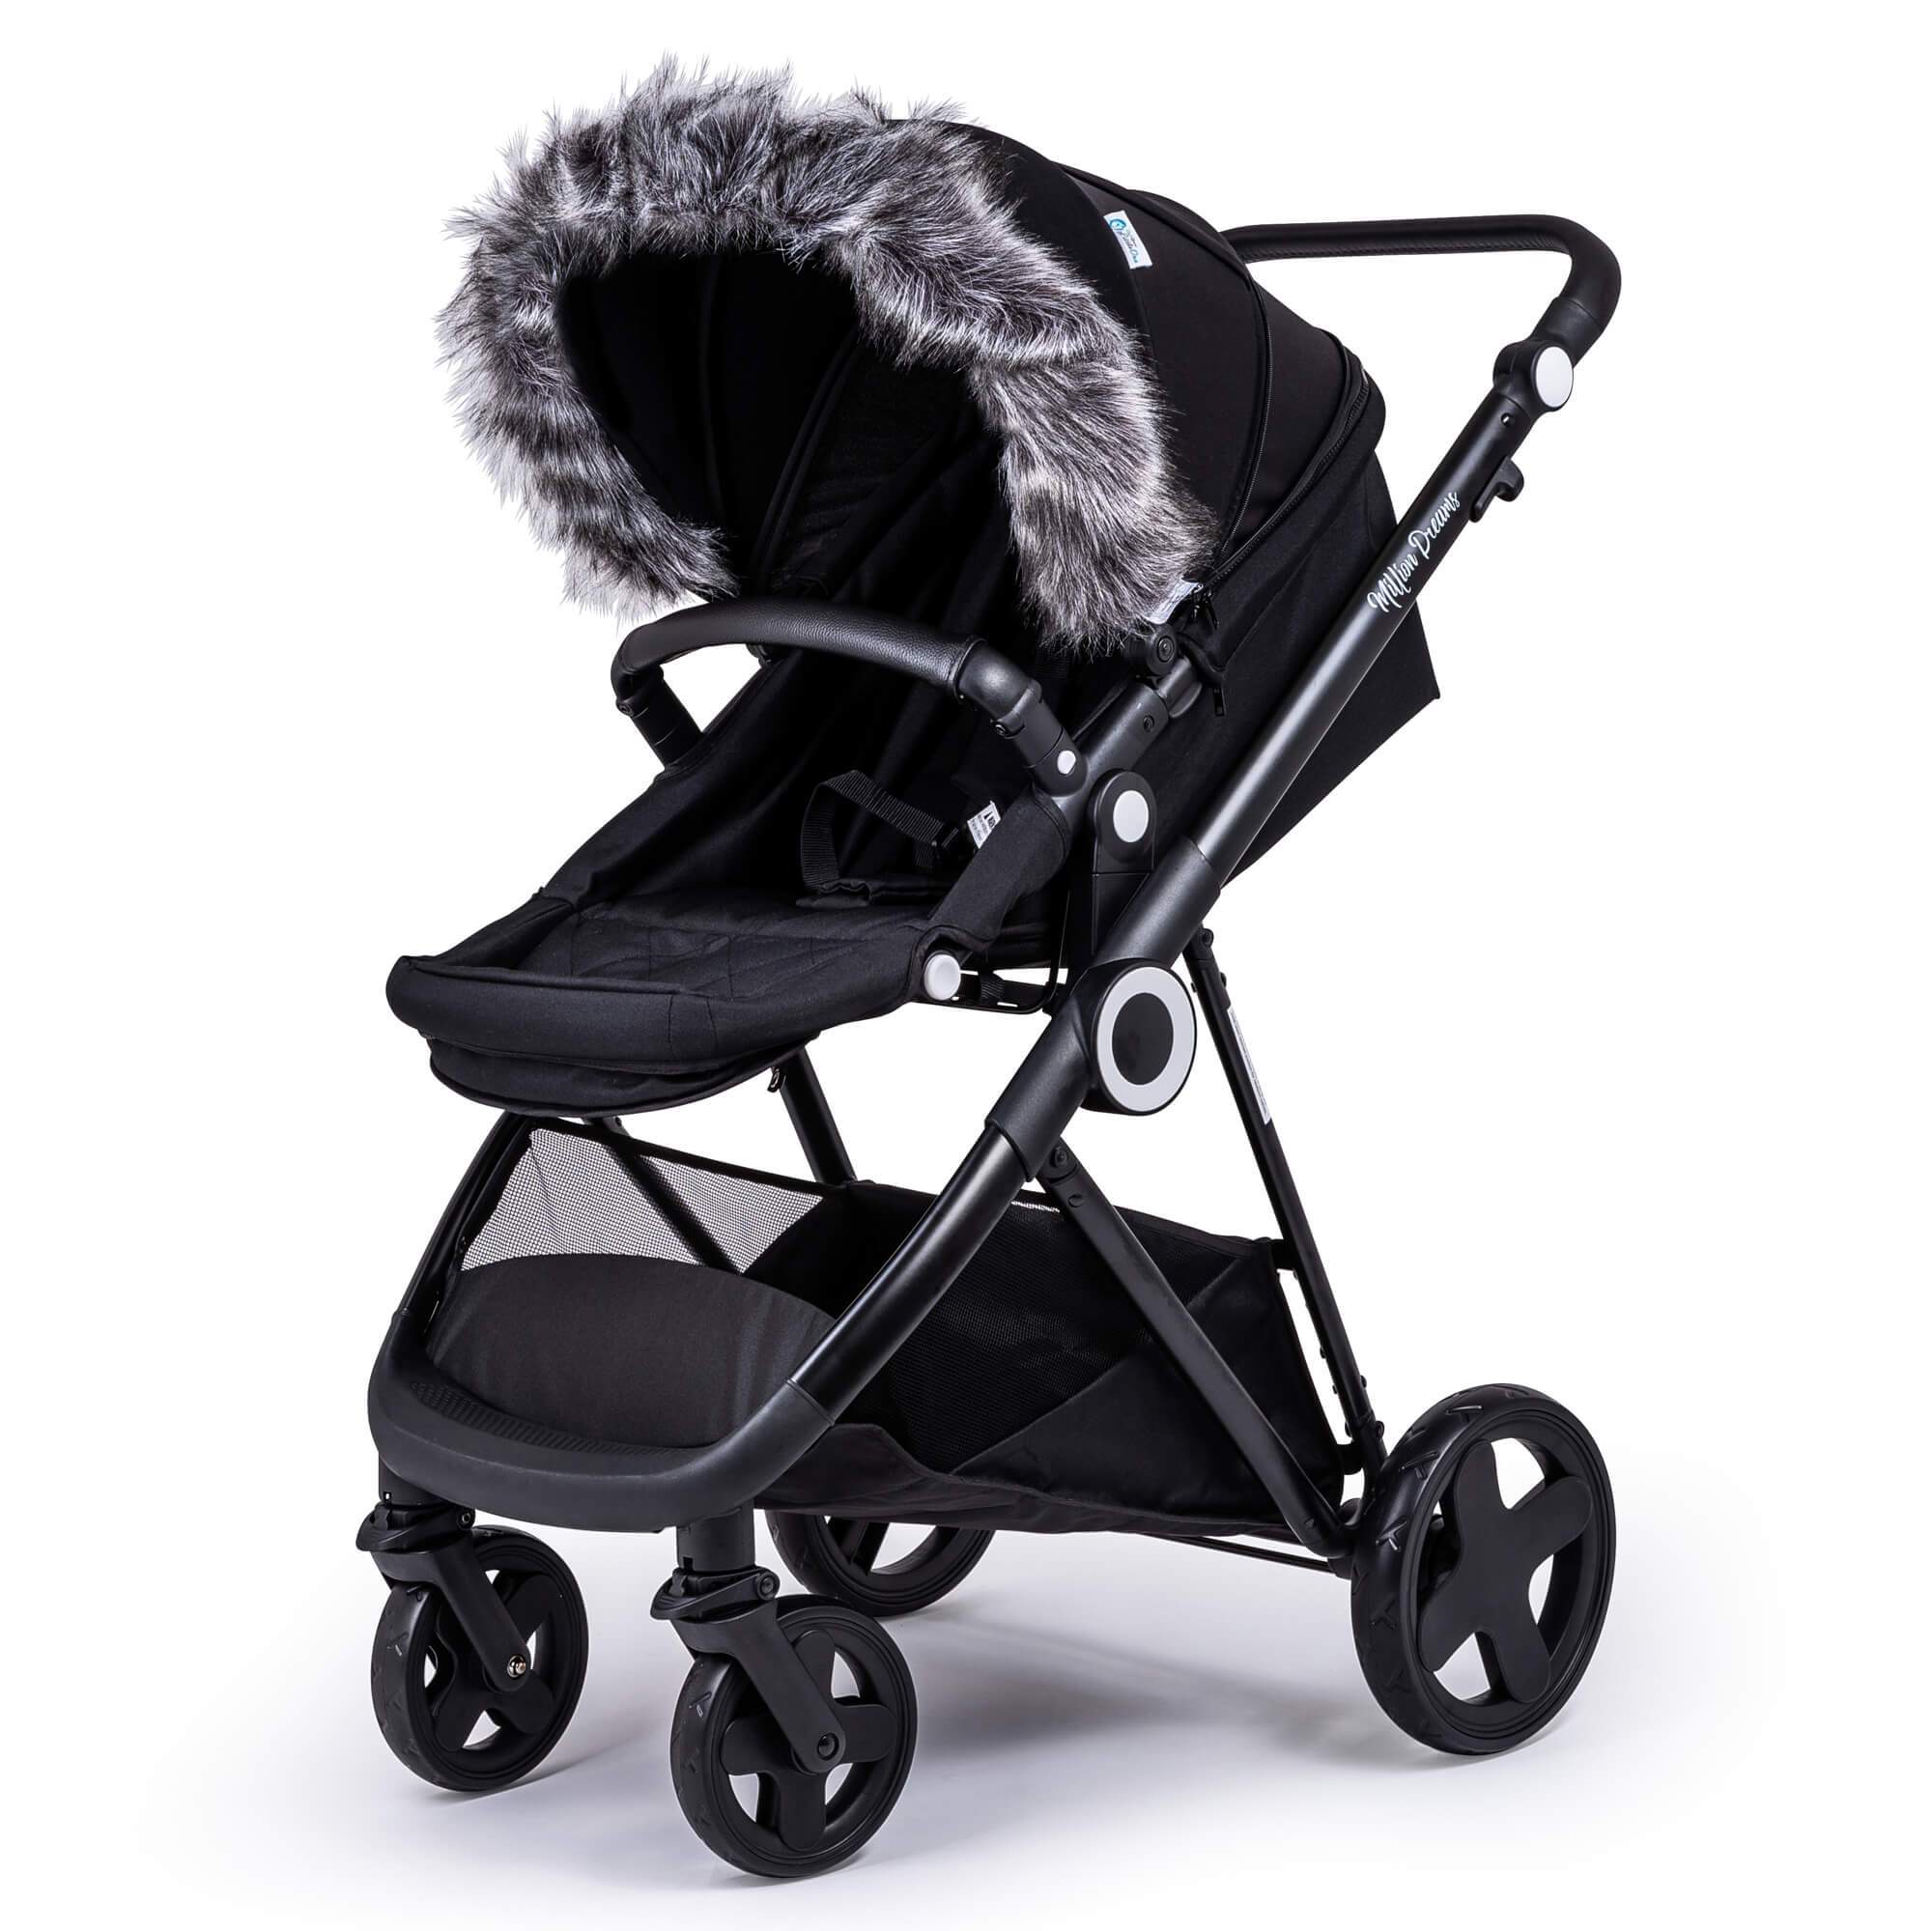 Pram Fur Hood Trim Attachment for Pushchair Compatible with ABC Design - Dark Grey / Fits All Models | For Your Little One